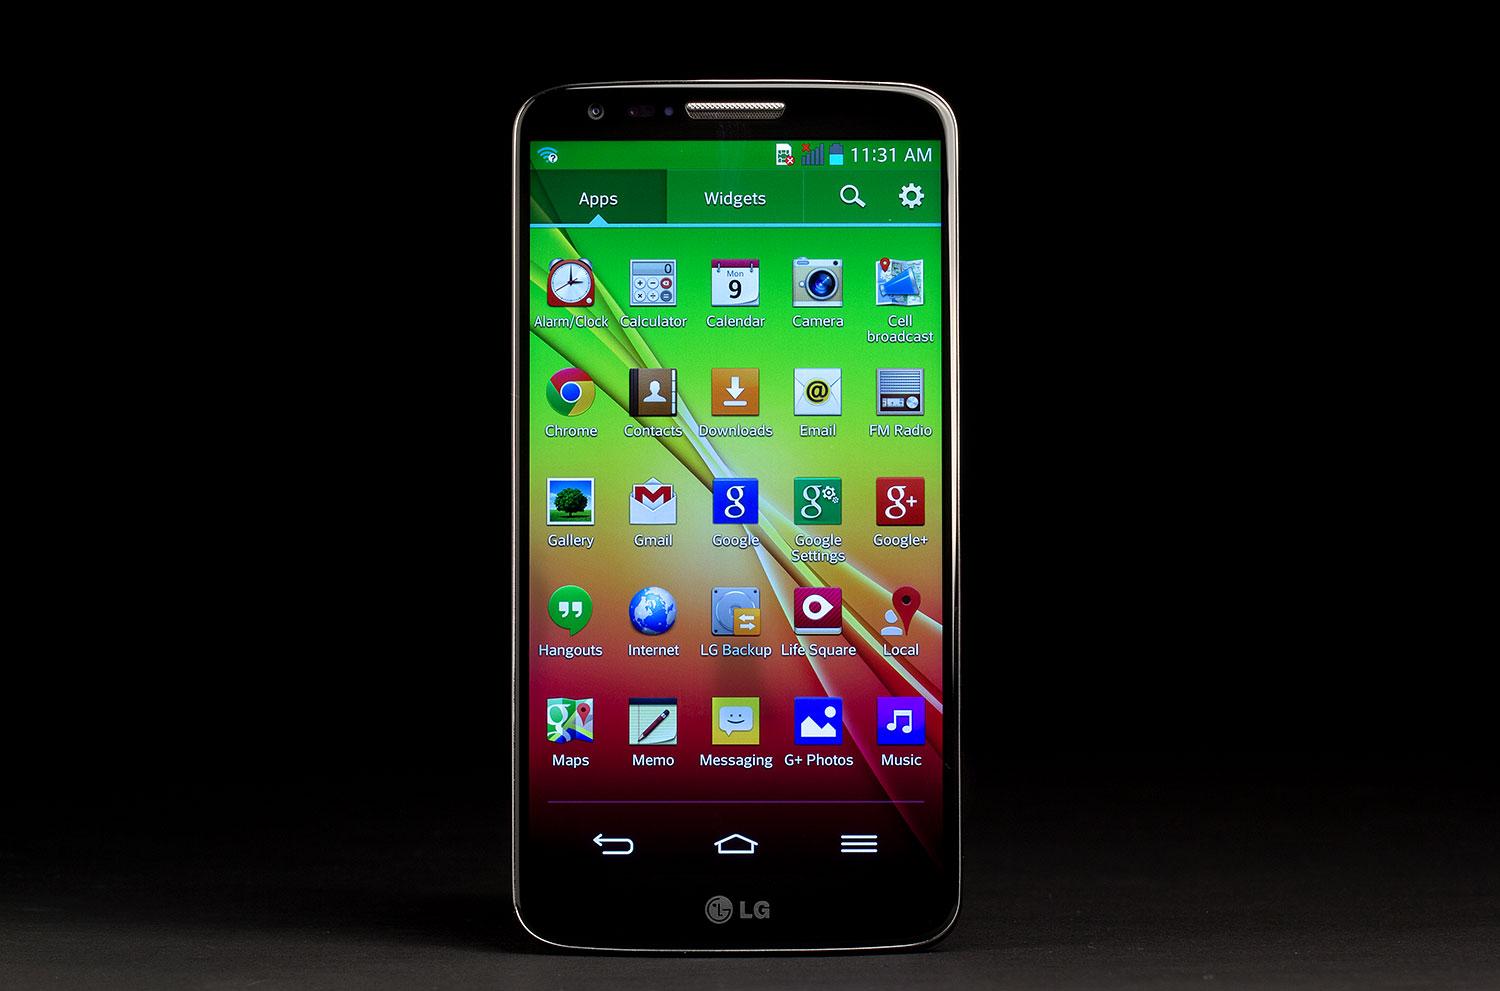 LG G2 Phone front home screen